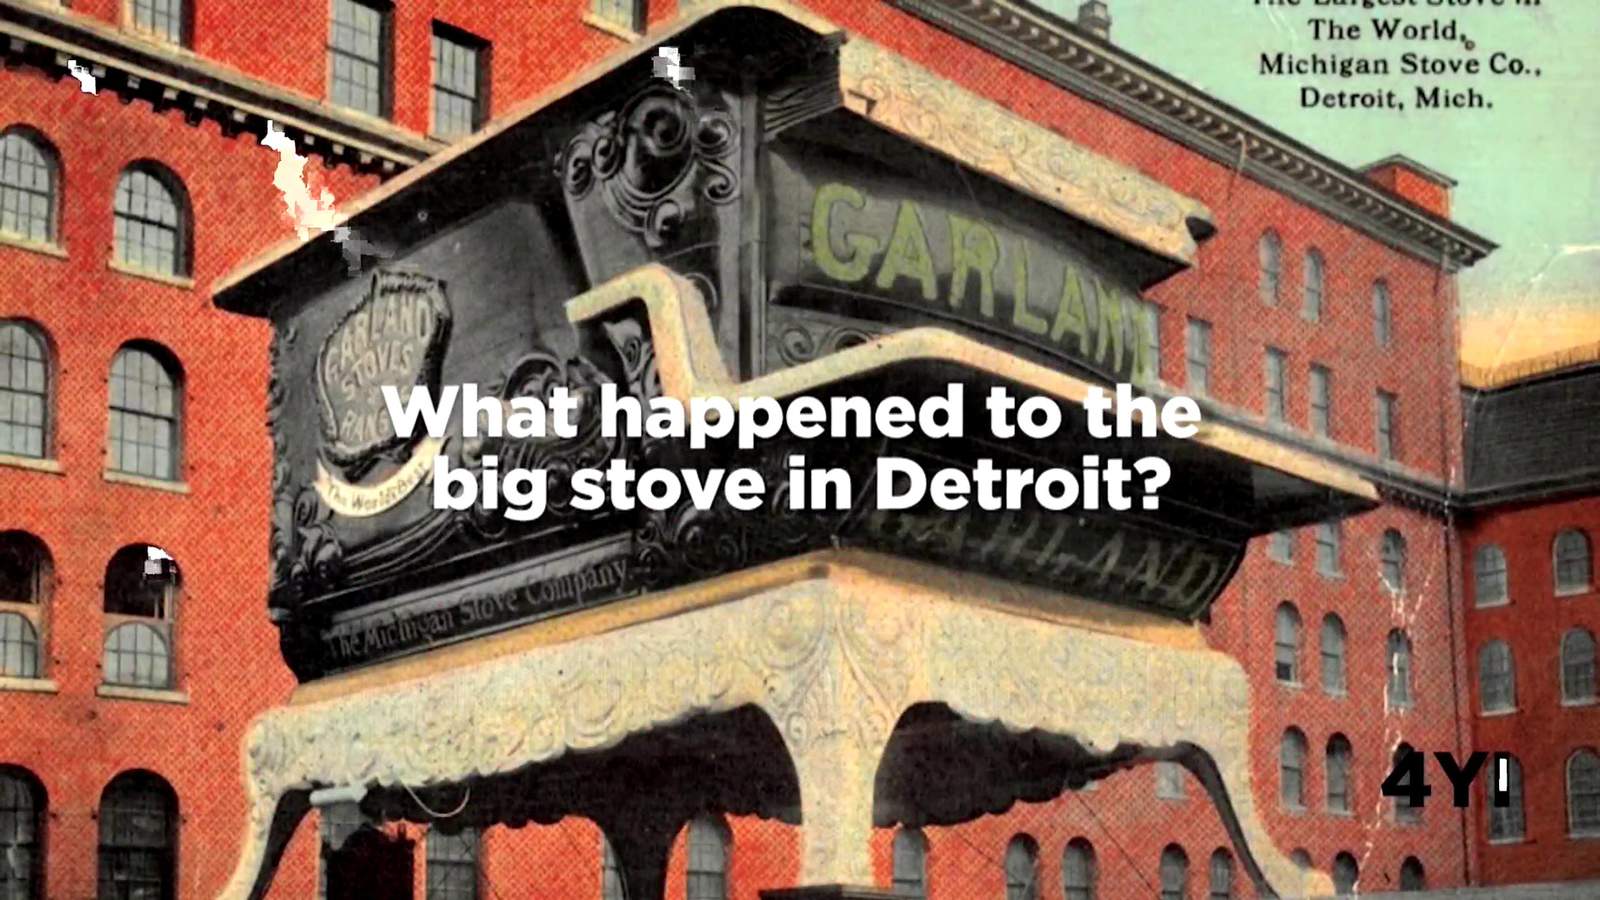 4YI -- What happened to the big stove next to entrance of State Fair in Detroit?